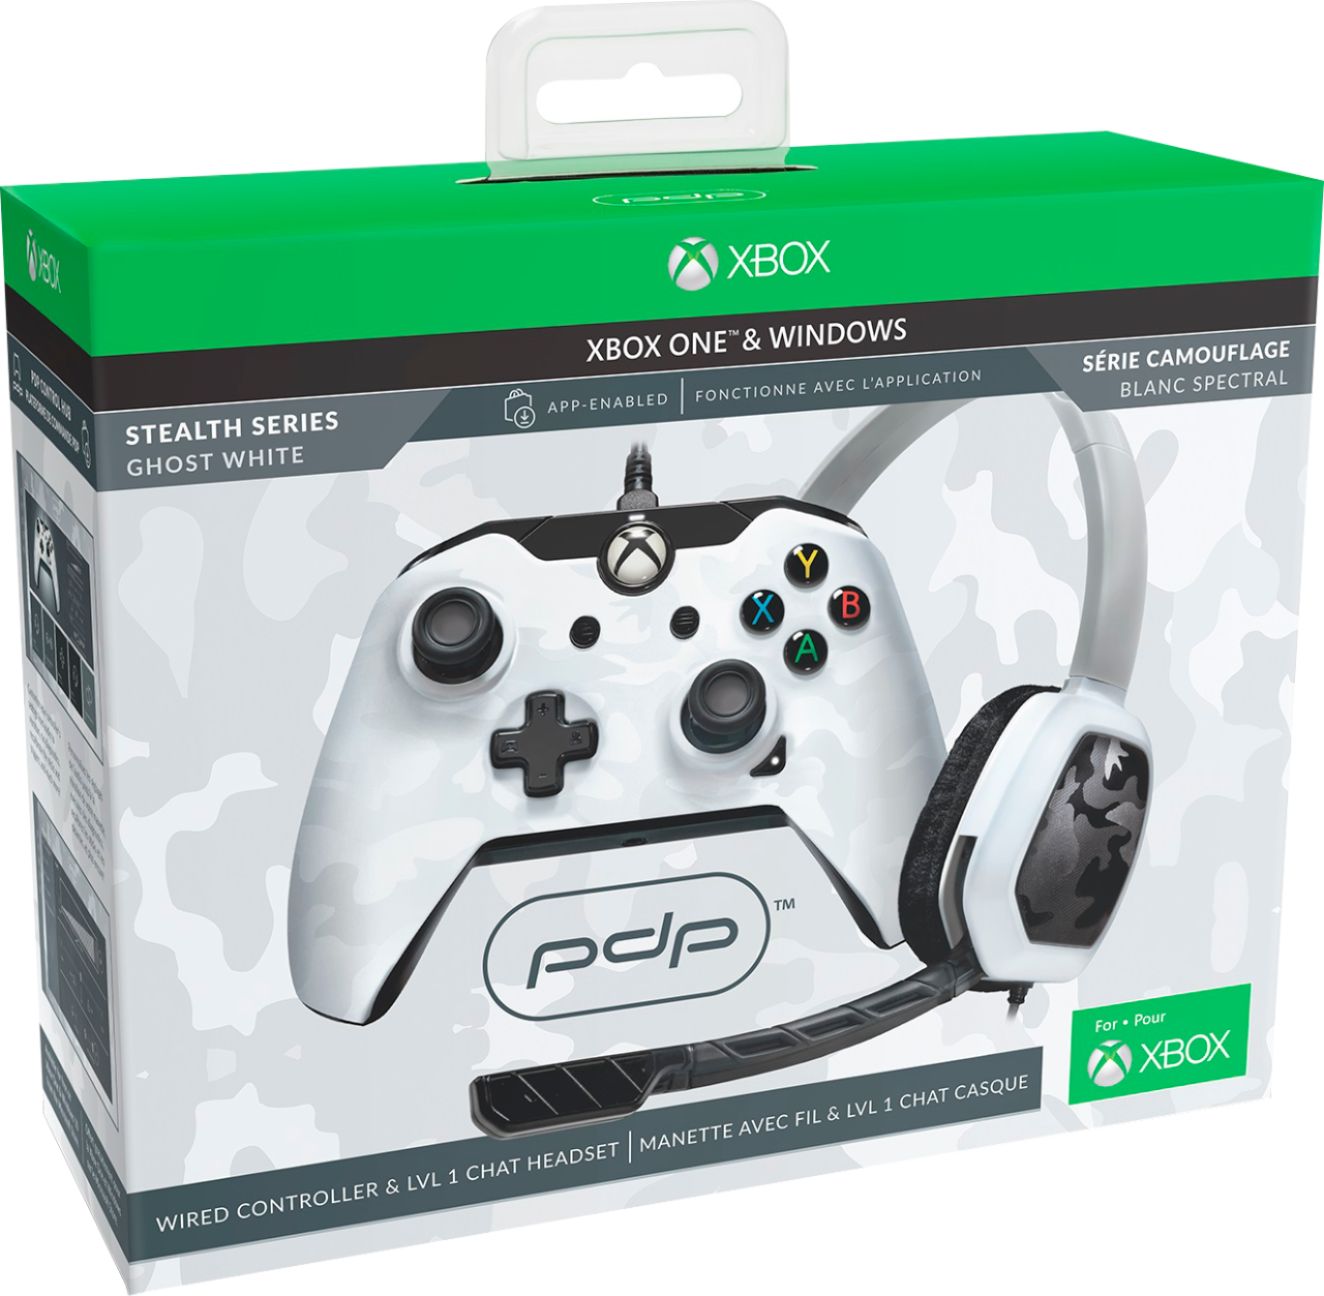 Best Buy Pdp Wired With Afterglow Lvl1 Chat Headset Controller